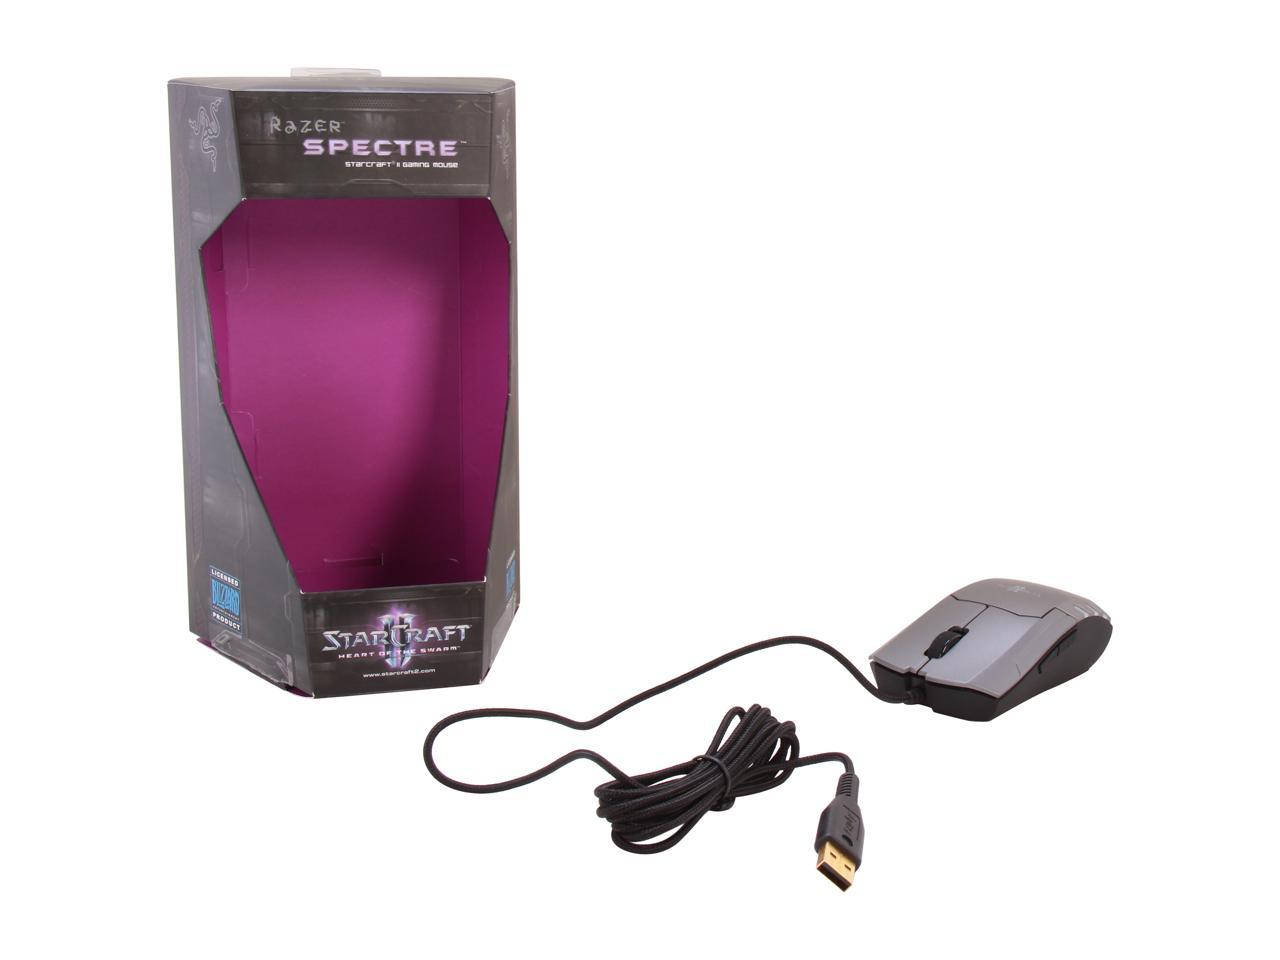 RAZER Spectre StarCraft II Heart of the Swarm RZ01-00430100-R3M2 Wired  Laser Gaming Mouse - Newegg.com